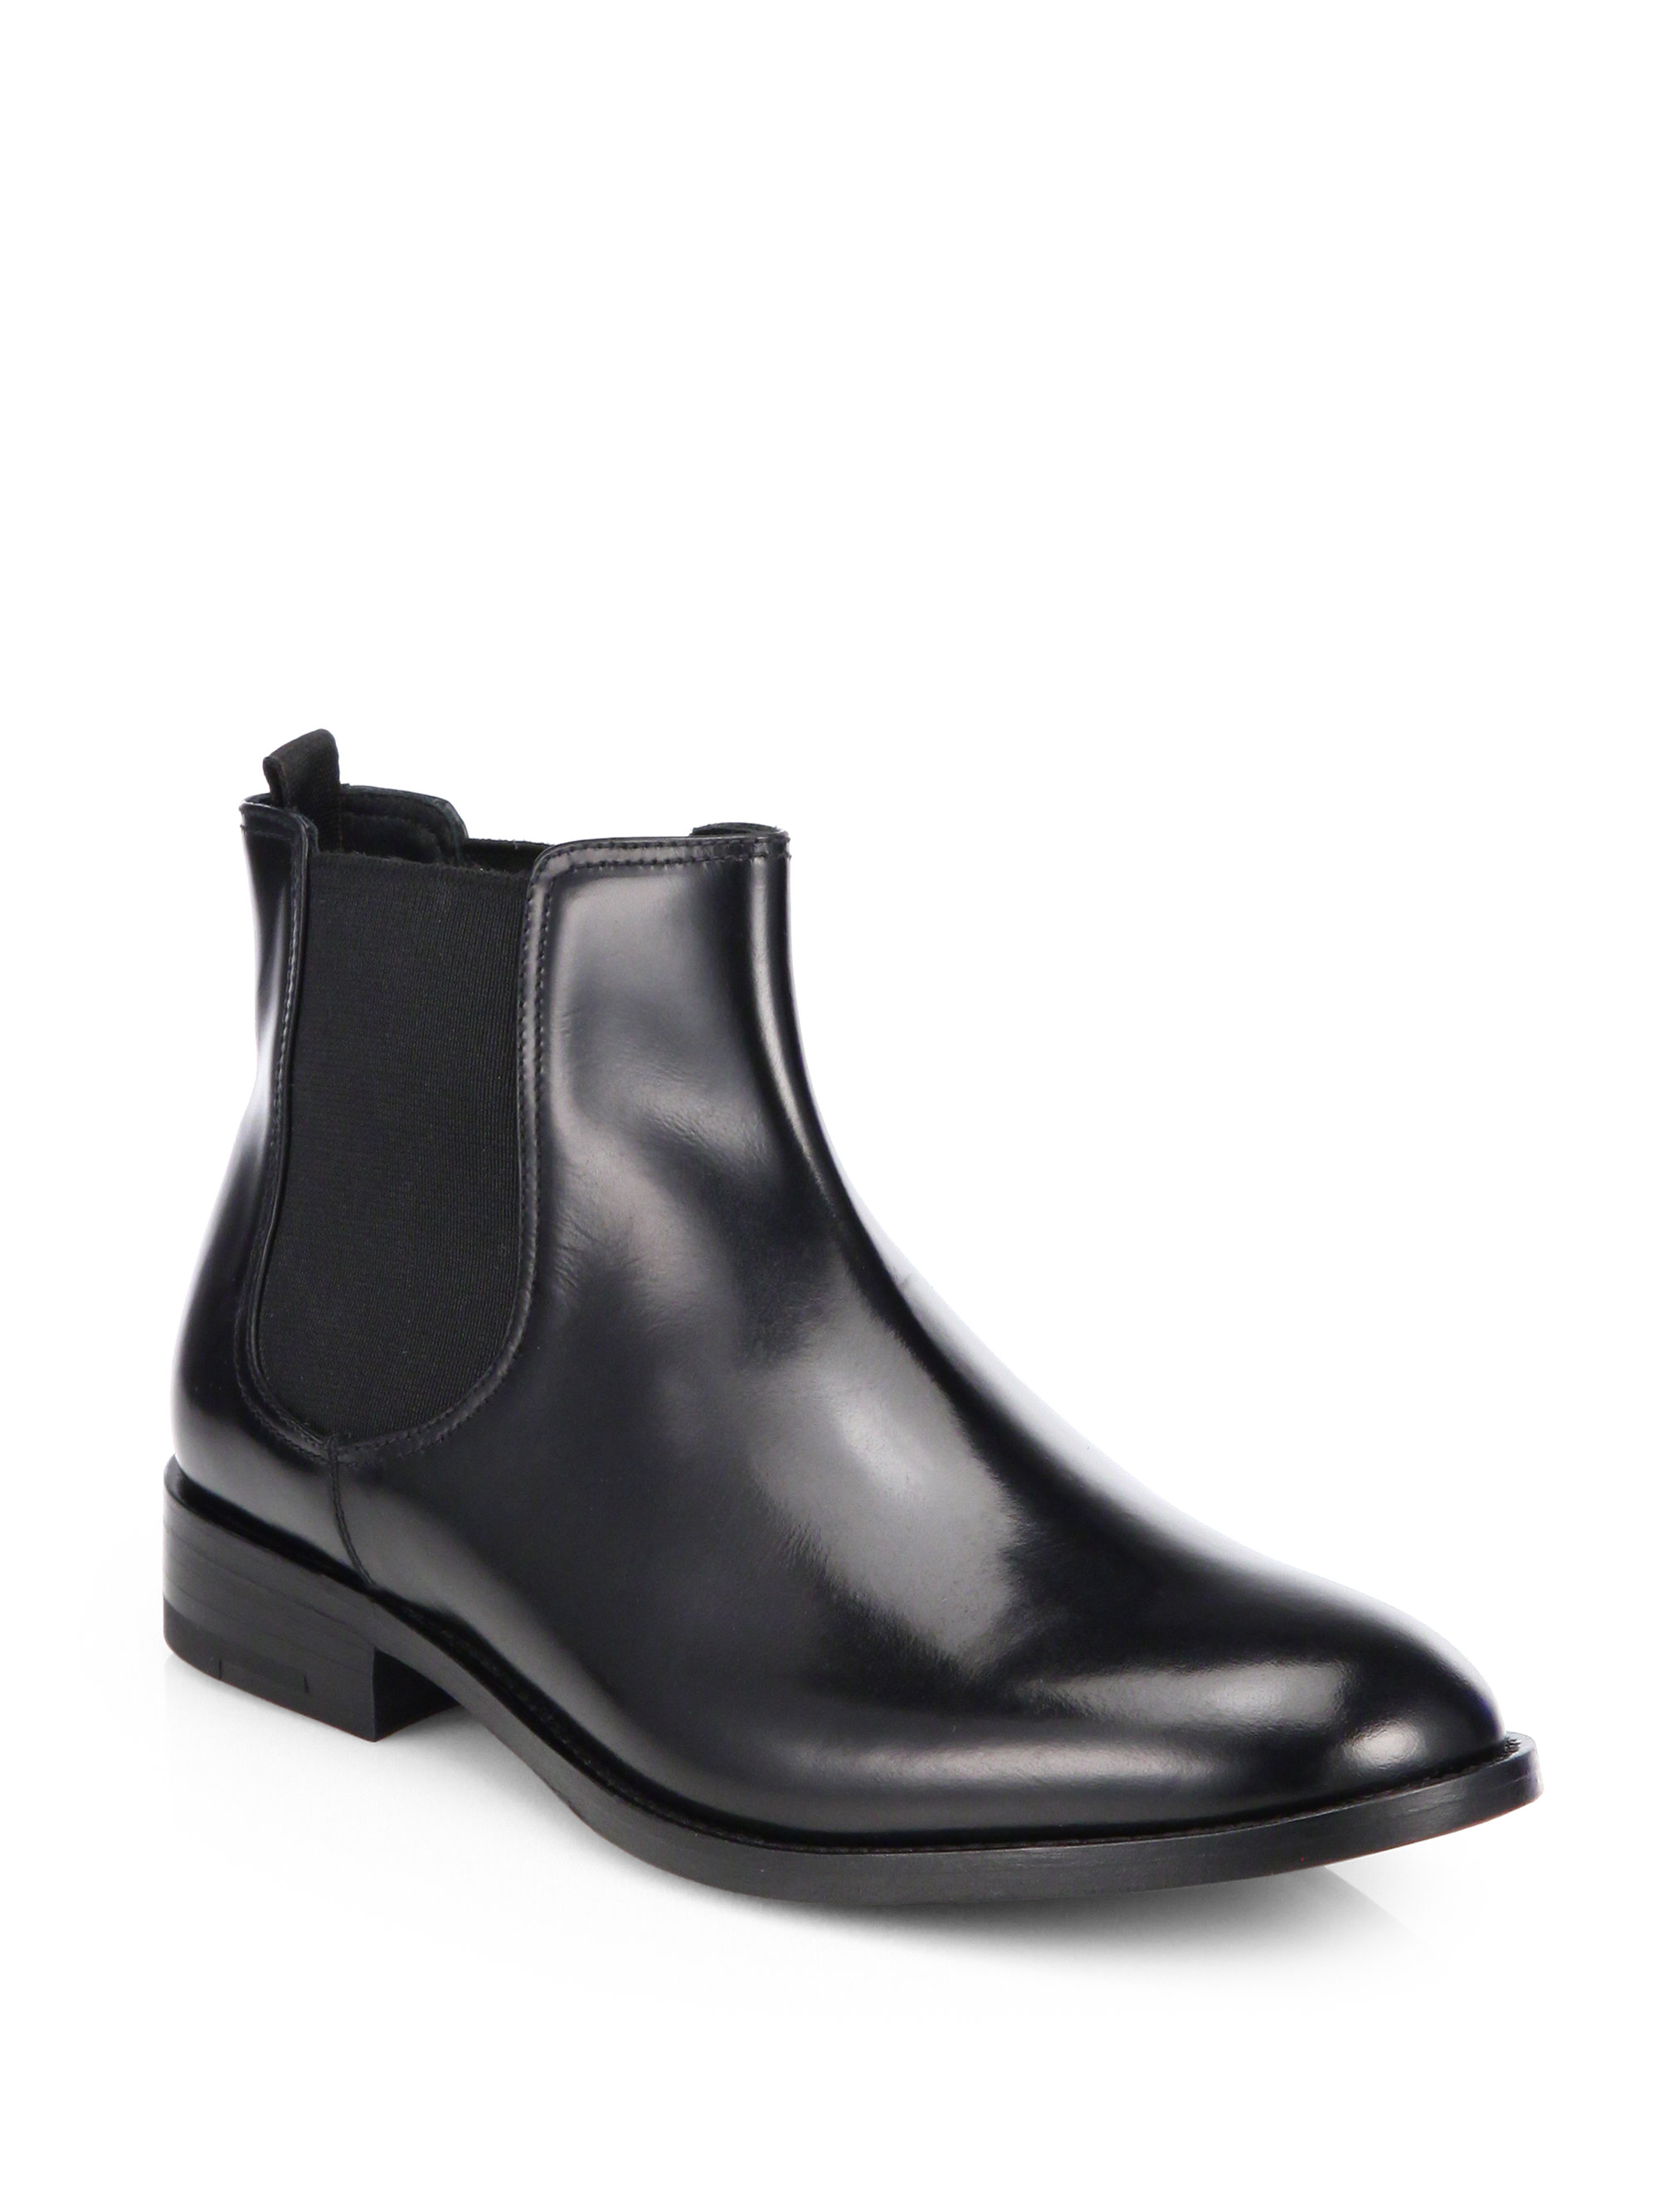 Giorgio Armani Leather Ankle Boots in Black | Lyst